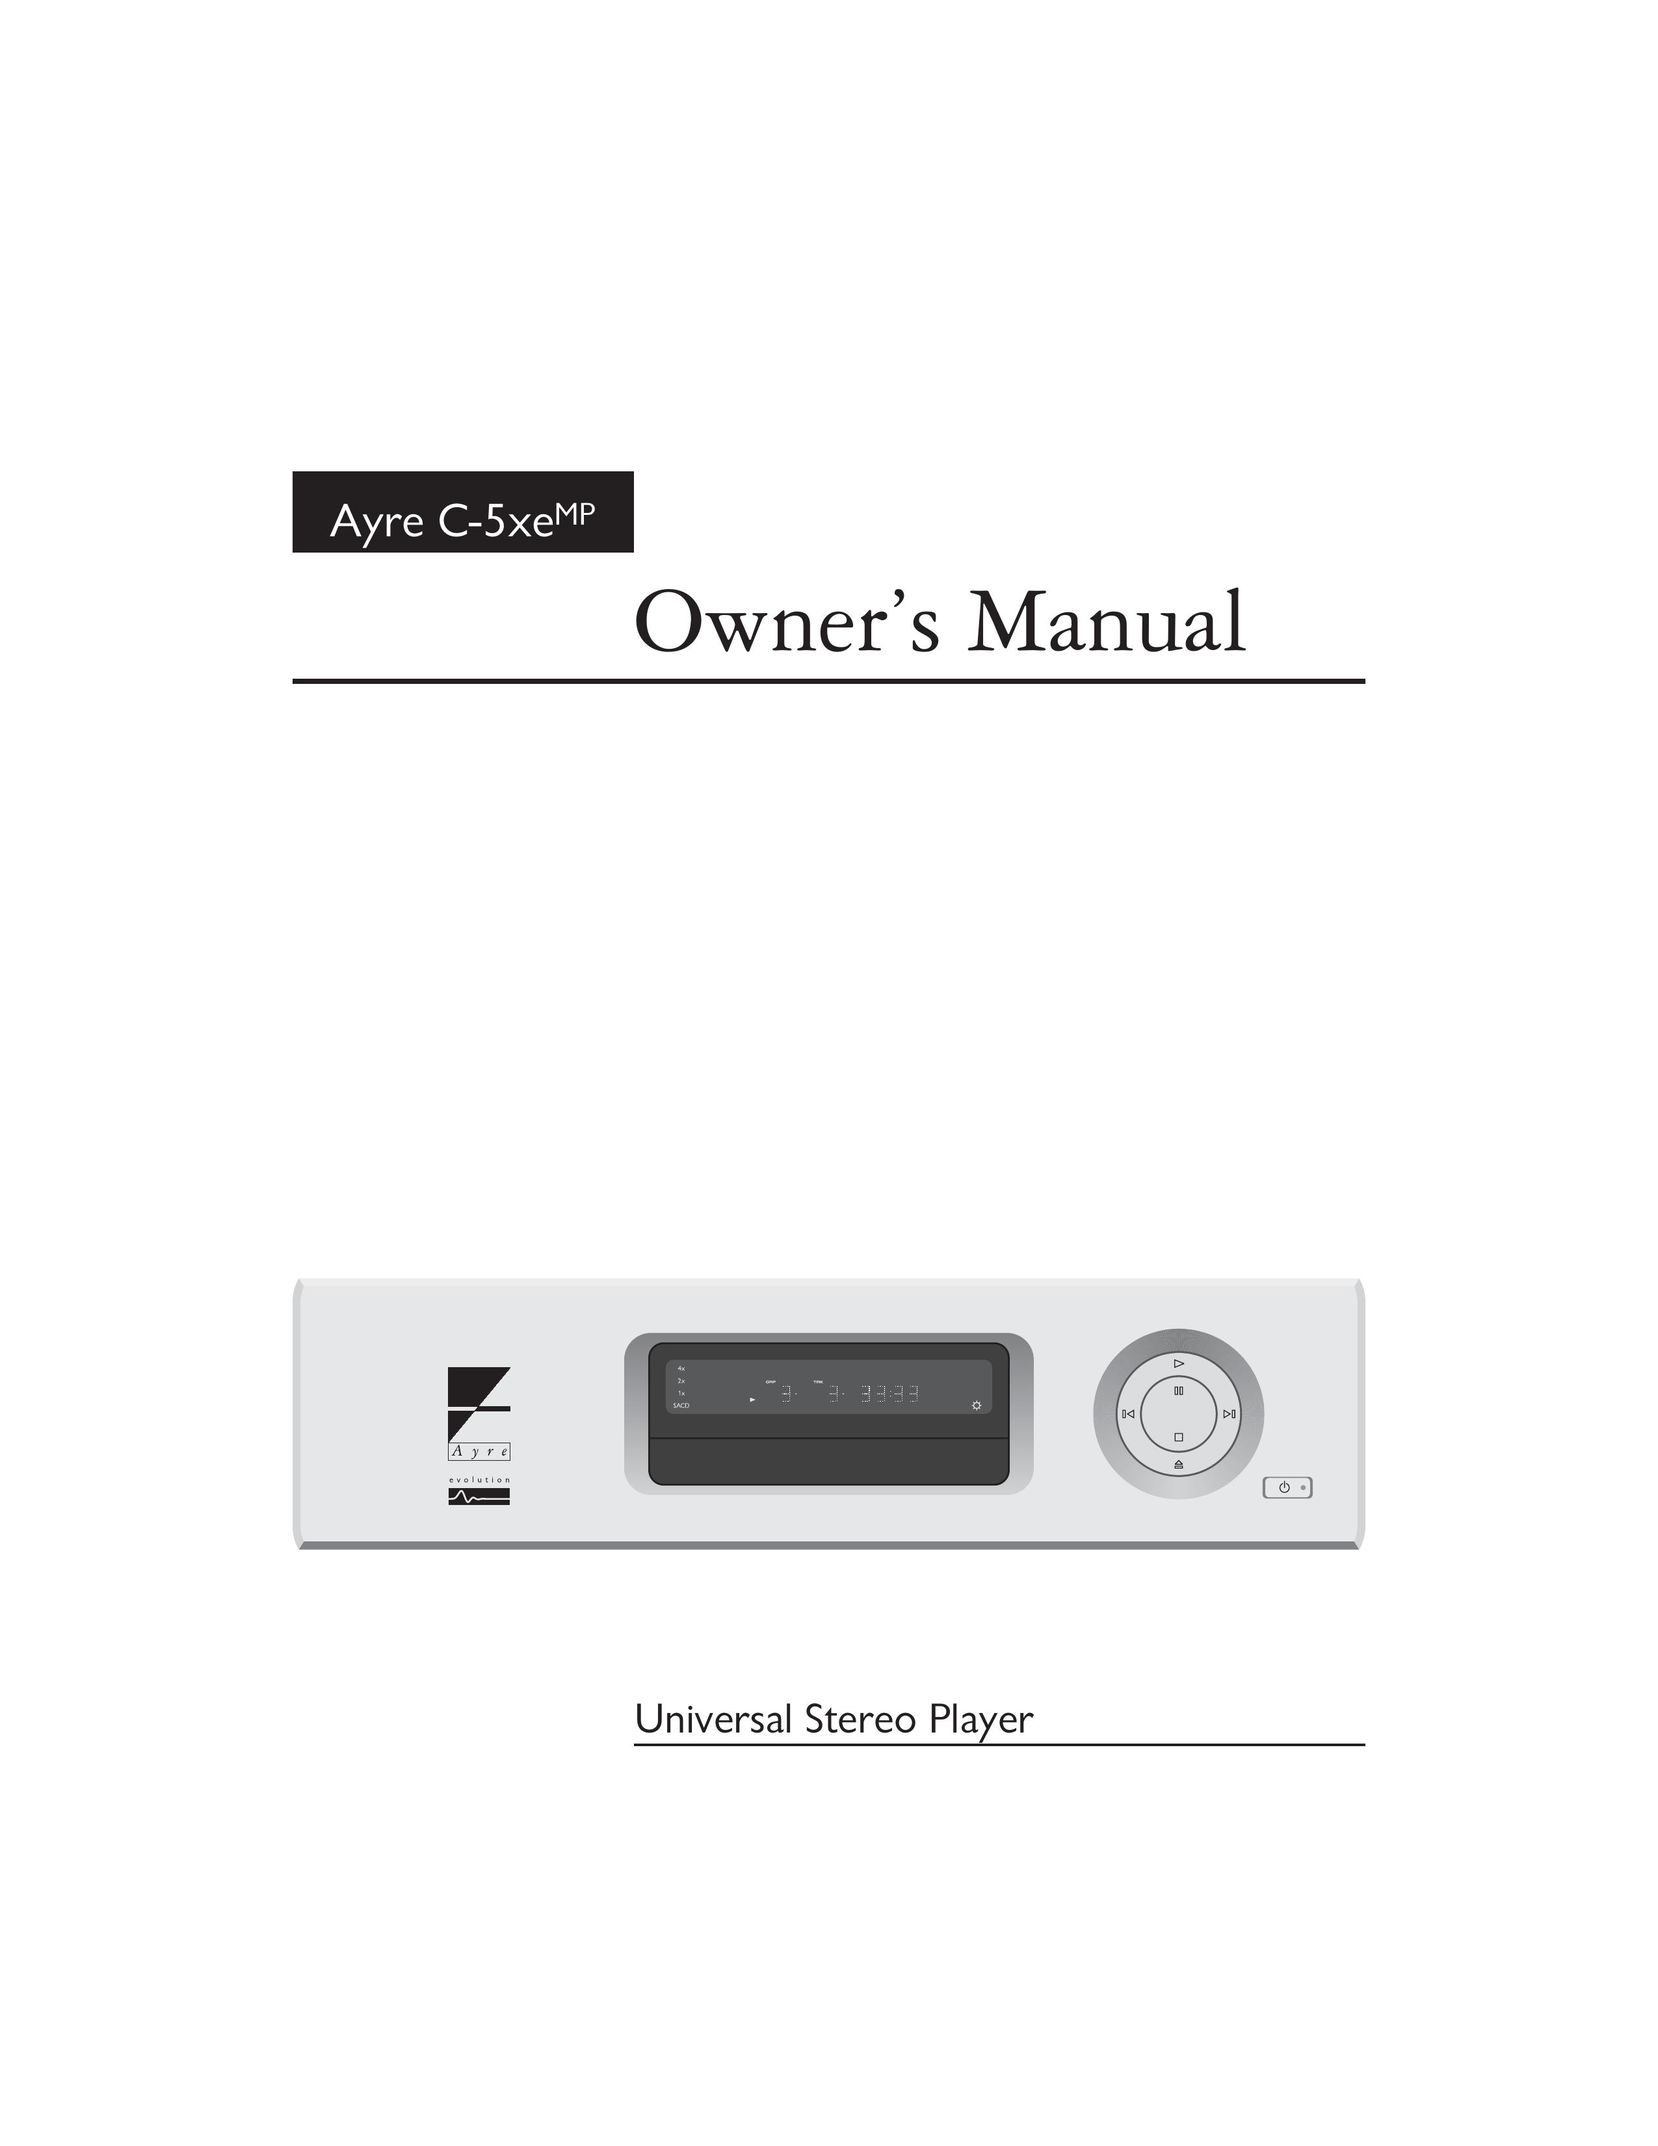 Ayre Acoustics C-5XEMP Stereo System User Manual